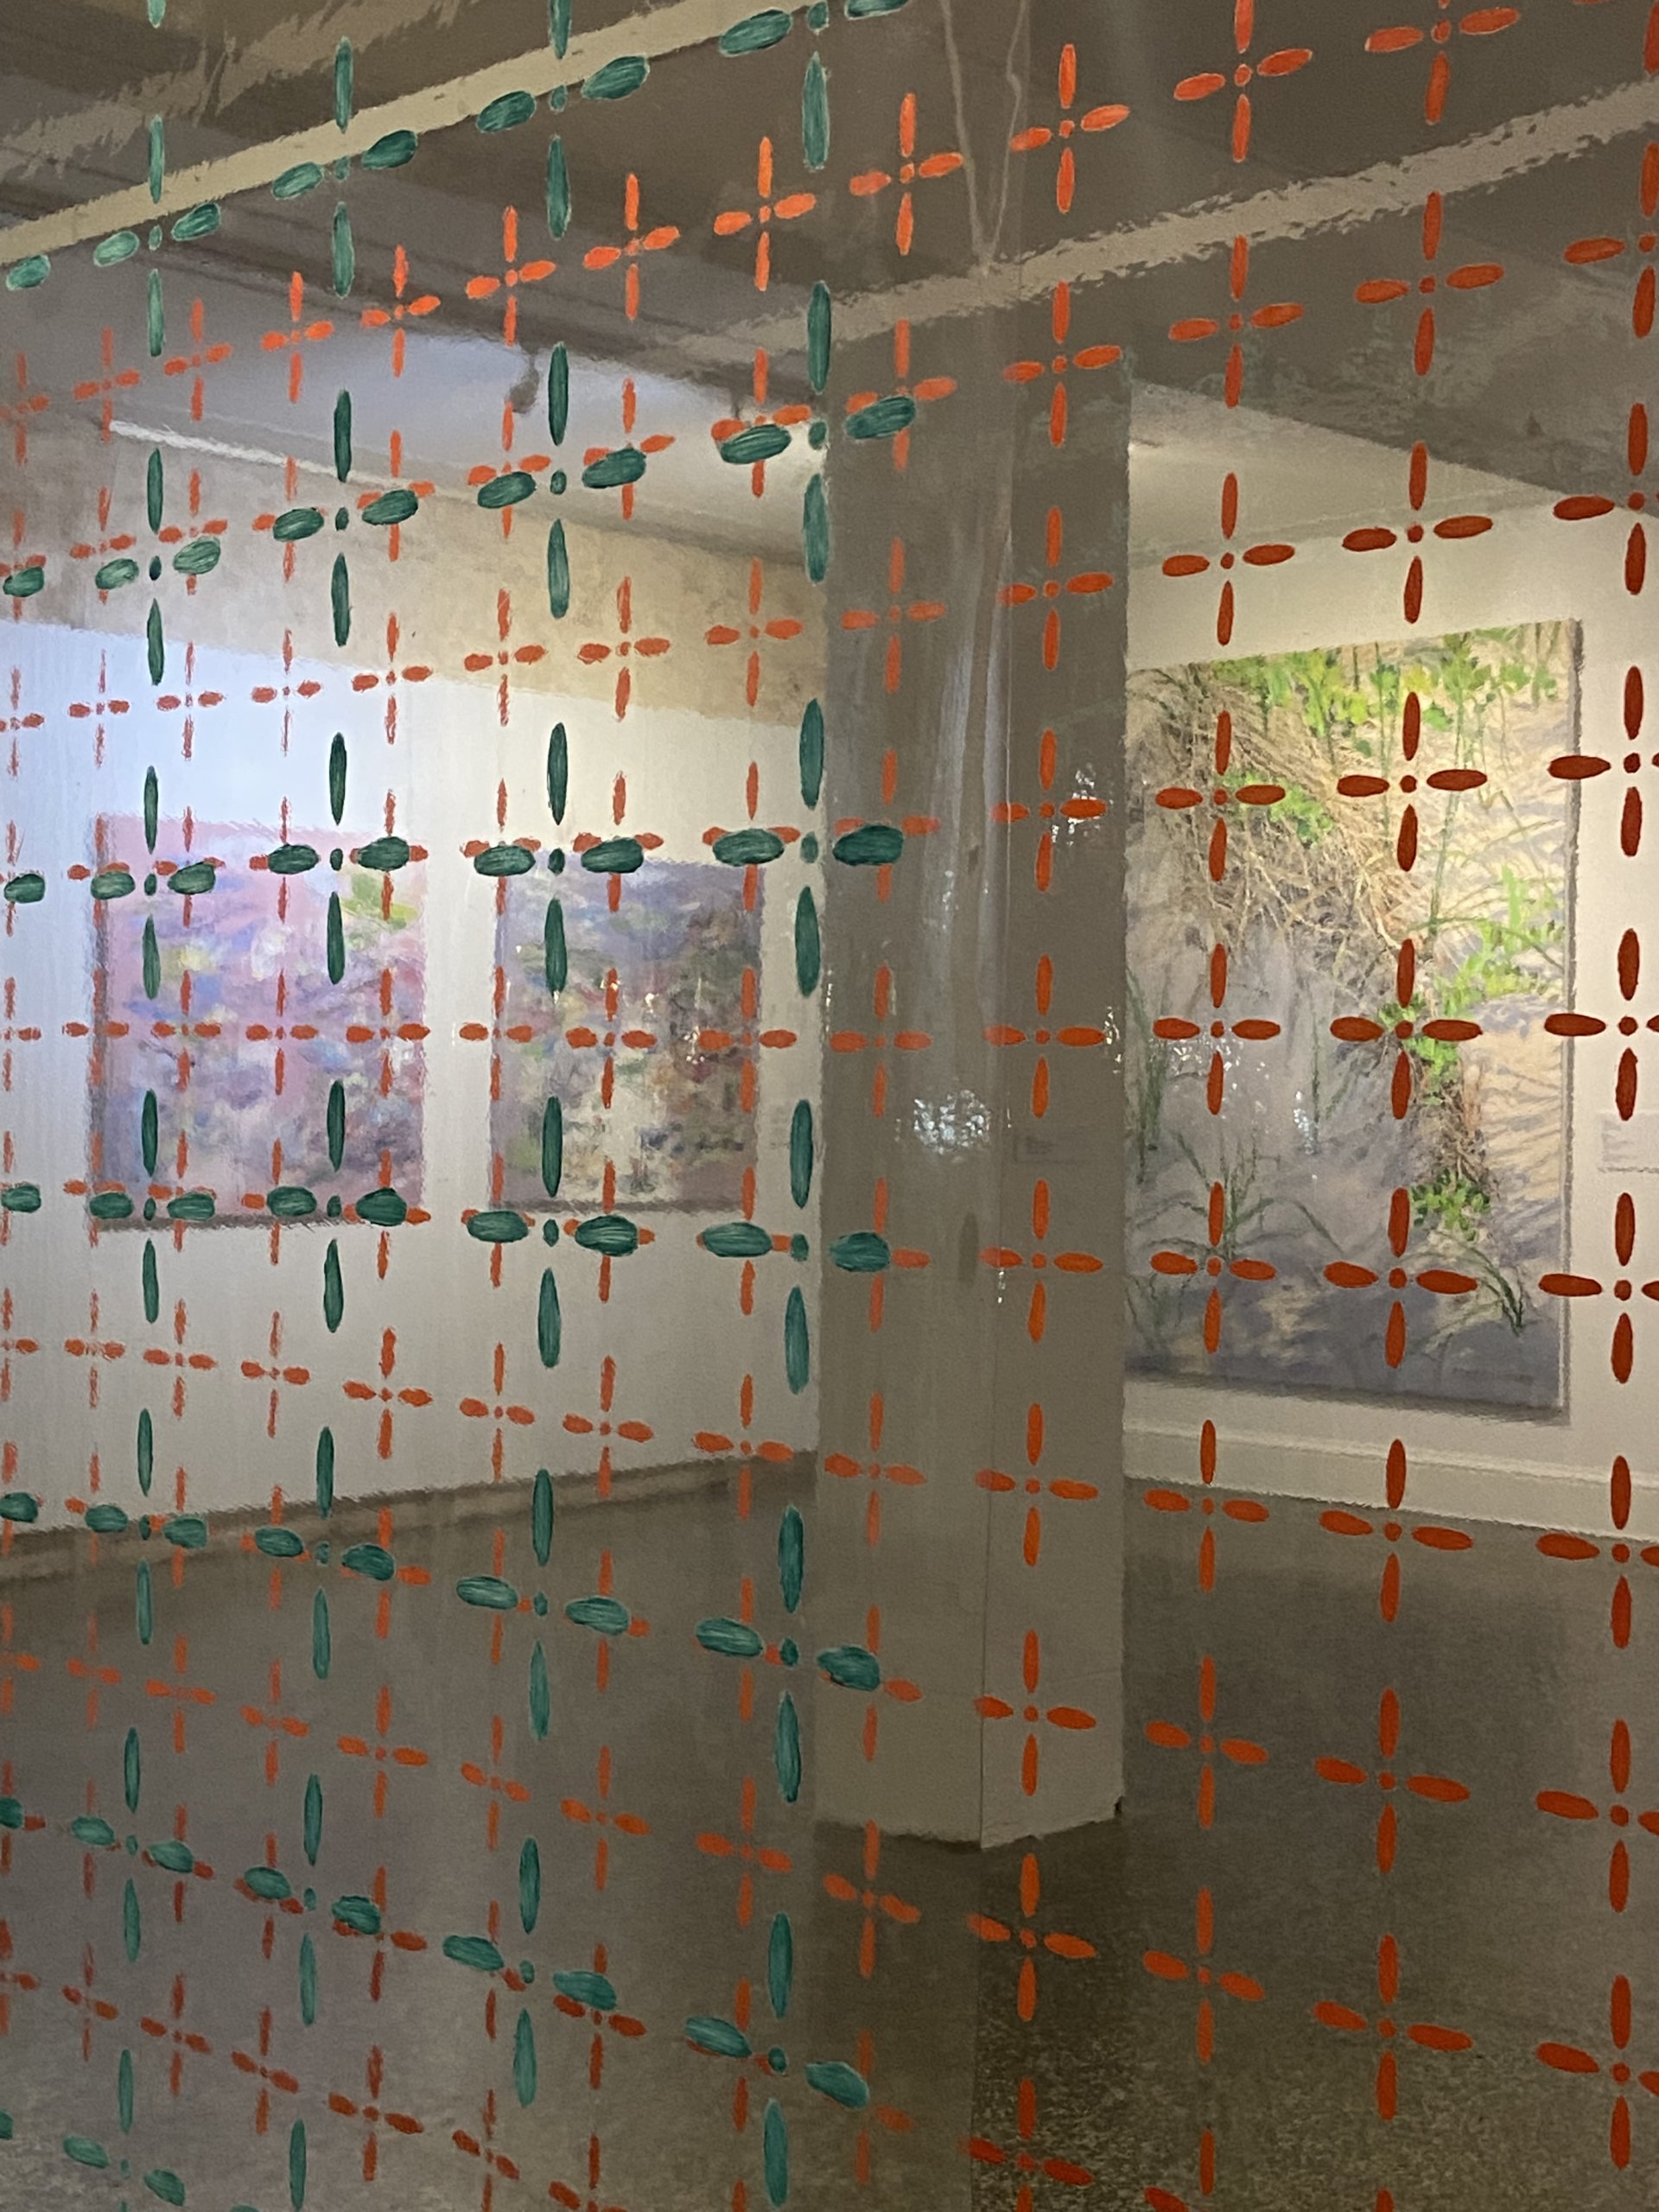 Mark Perry's installation at the Coral Gables Museum